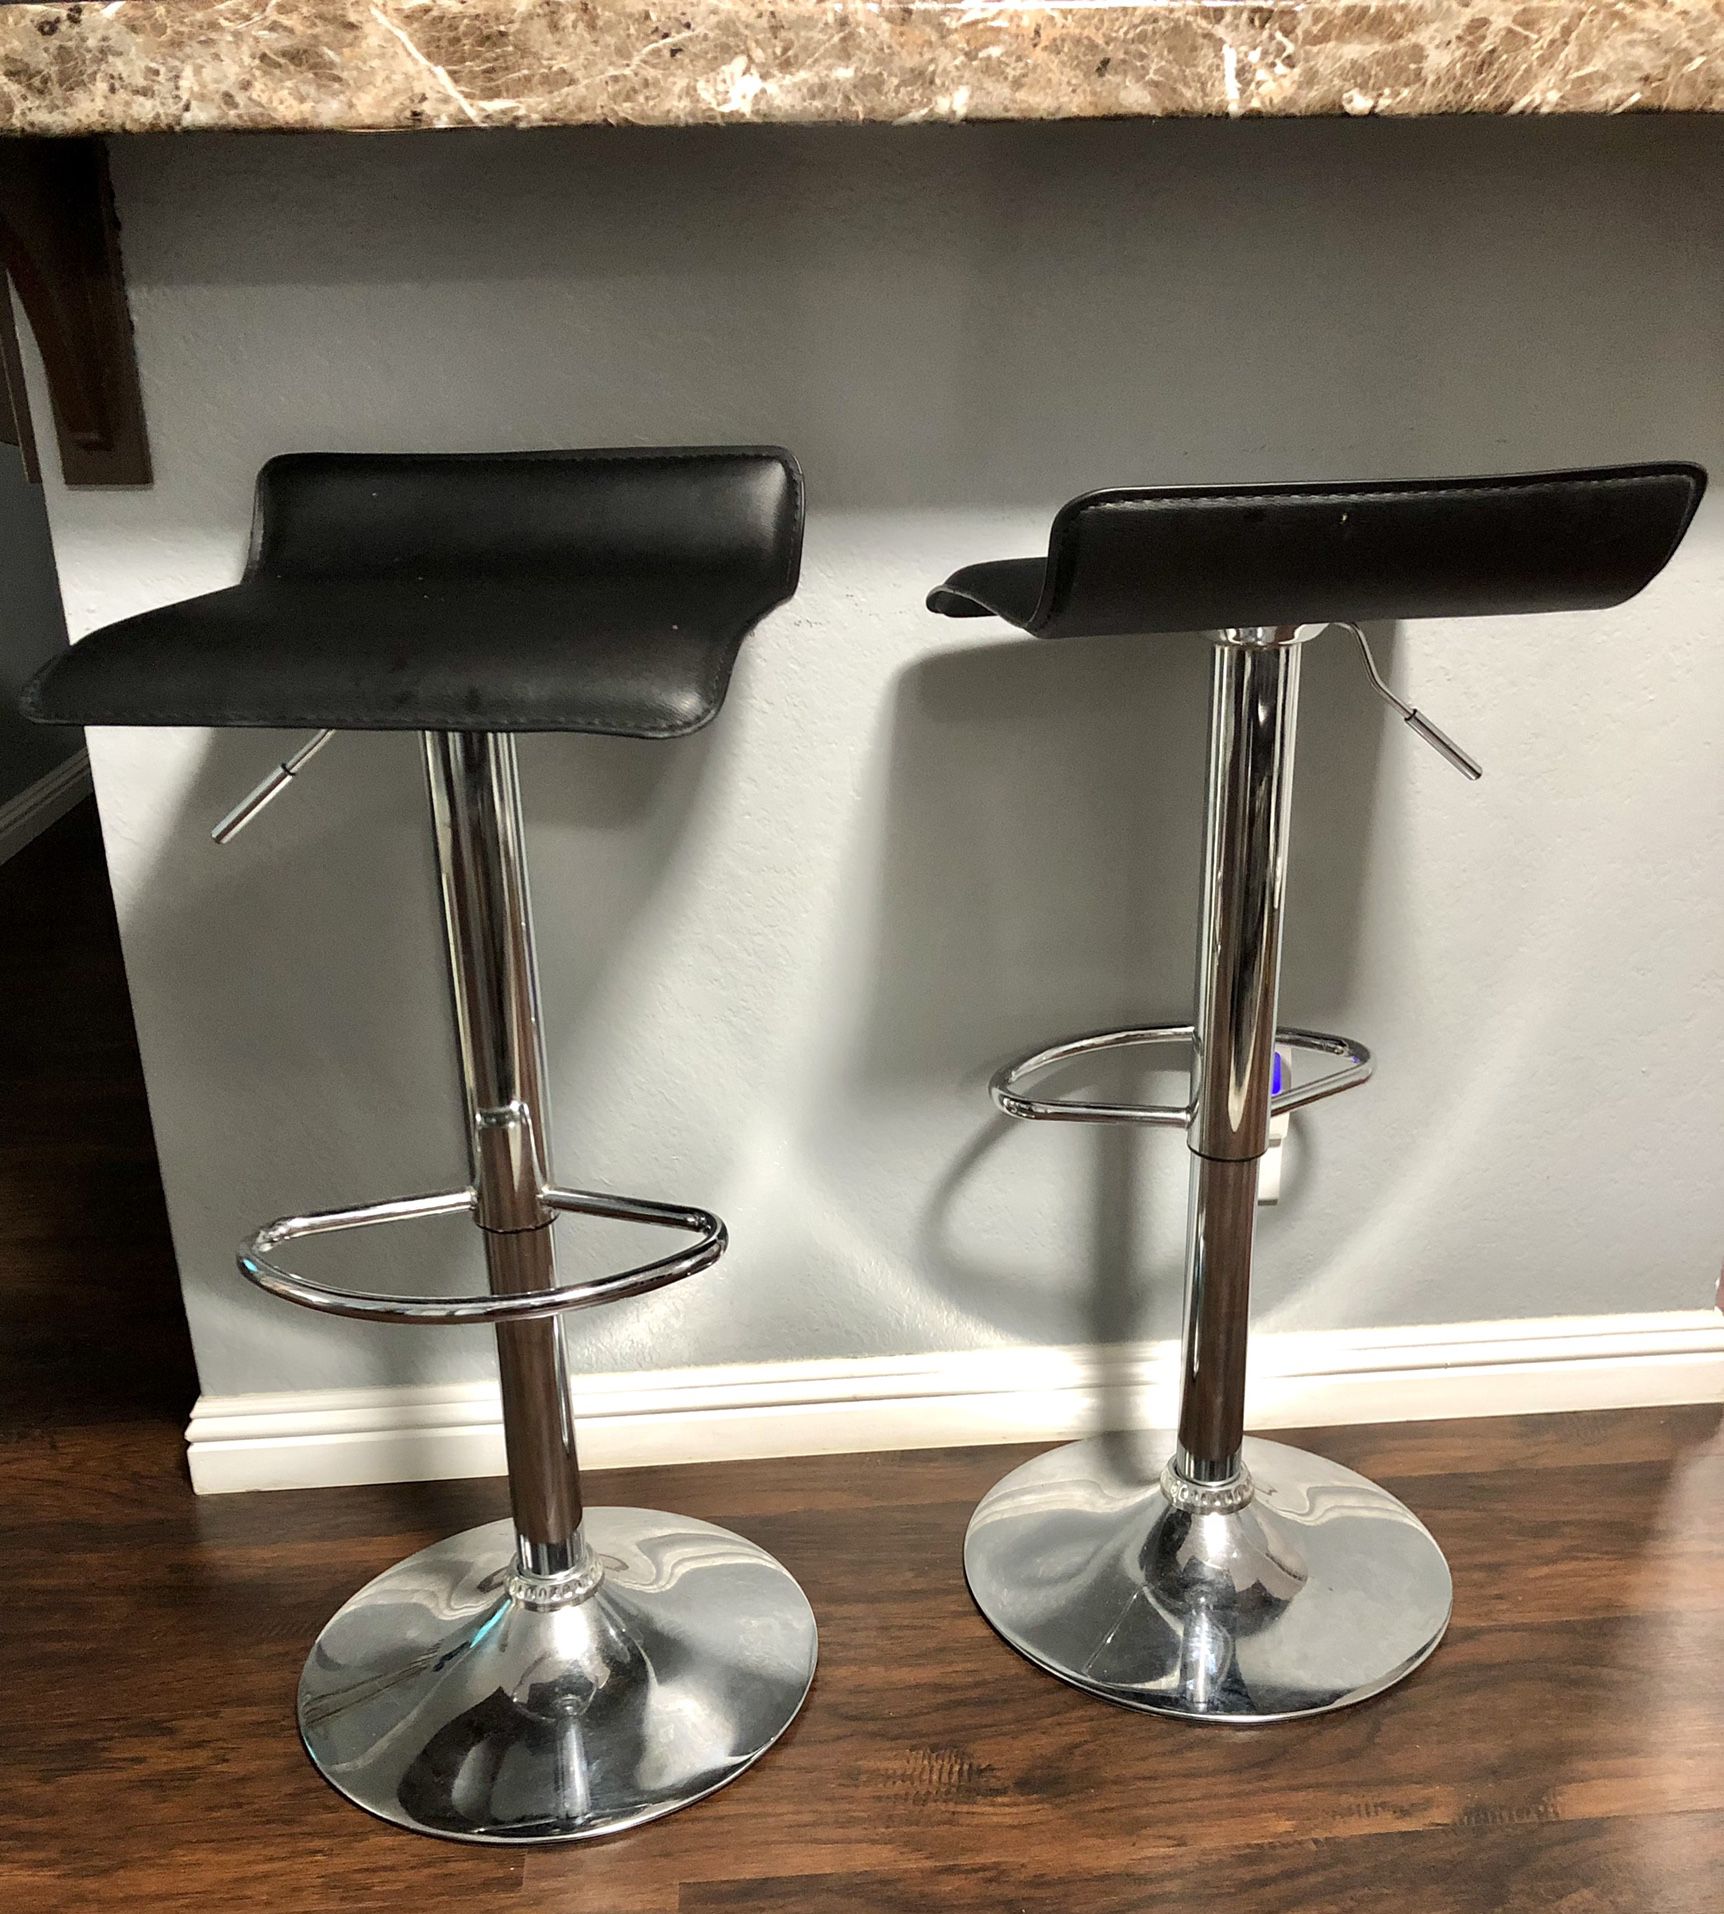 Slightly used 2 Black leather Style with Steel Adjustable Bar Stools Chairs